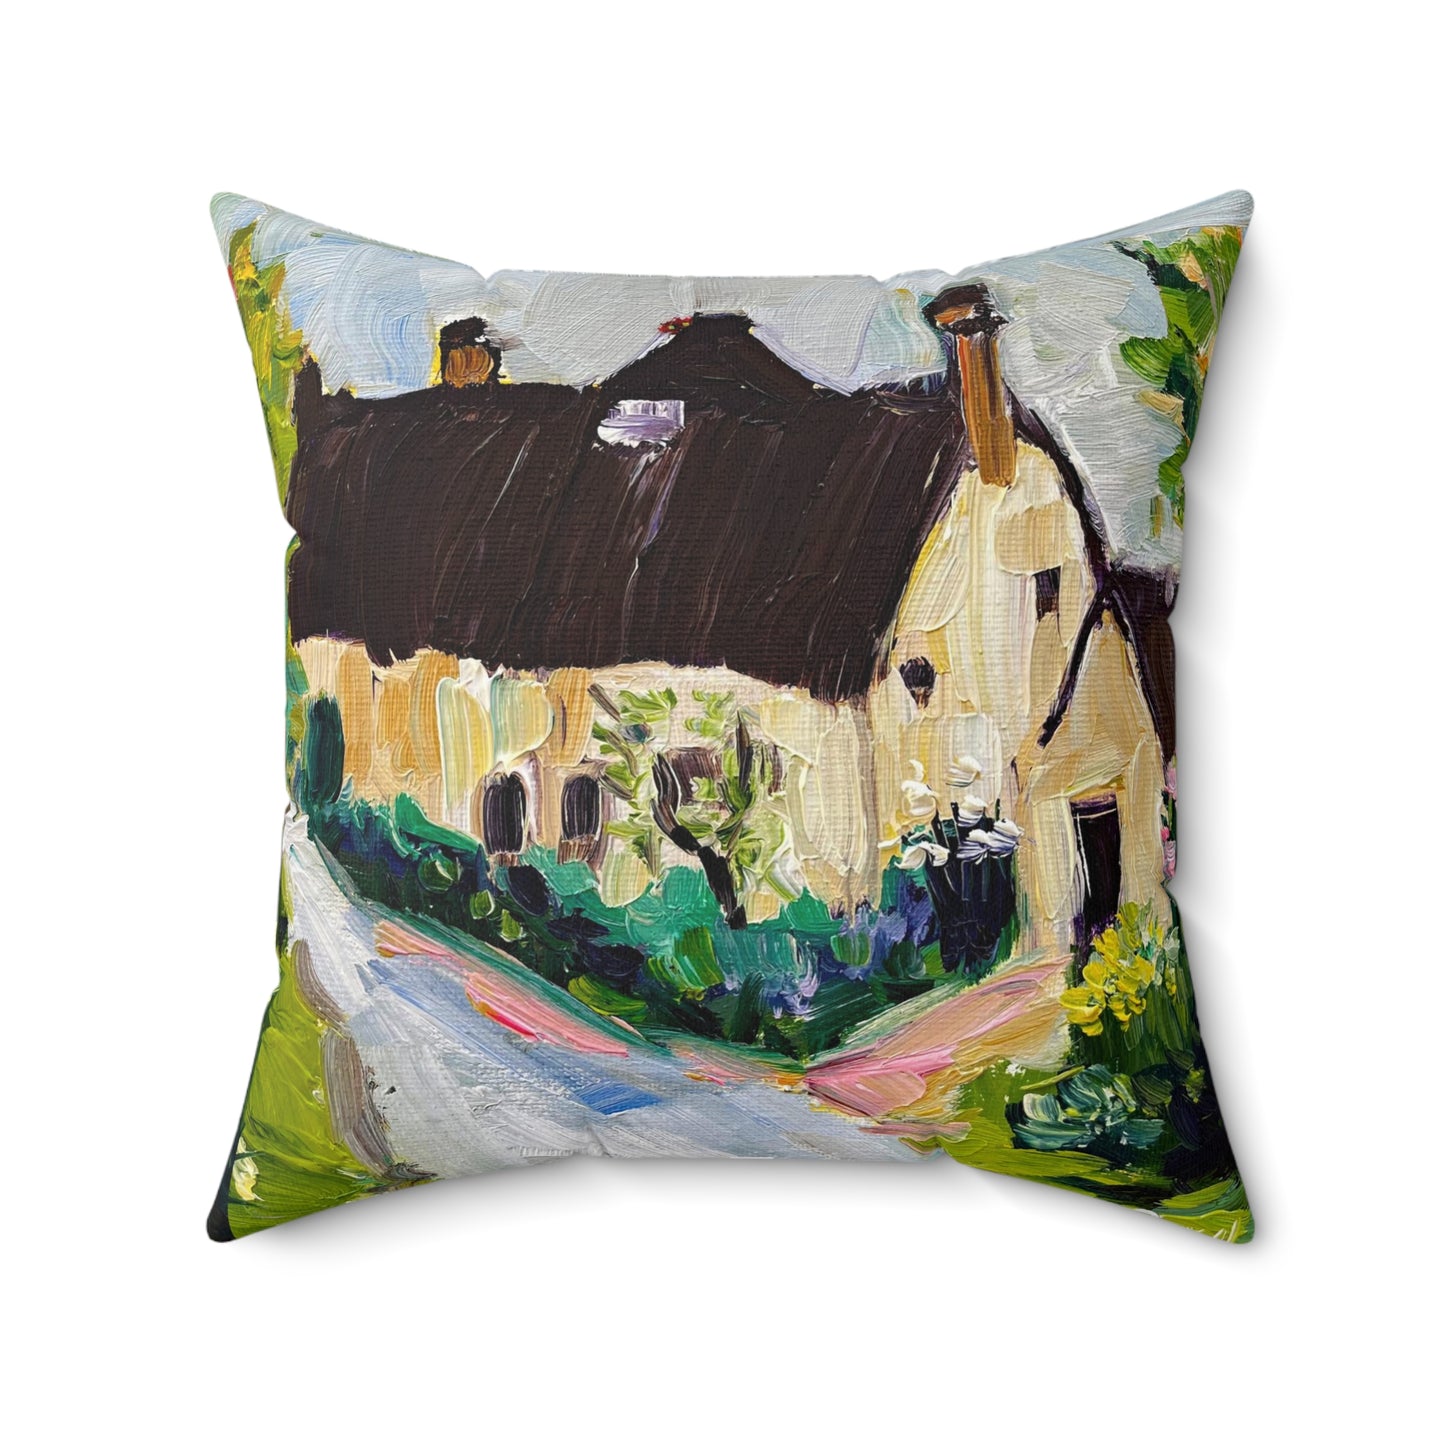 Charming Cotswolds Village Indoor Spun Polyester Square Pillow